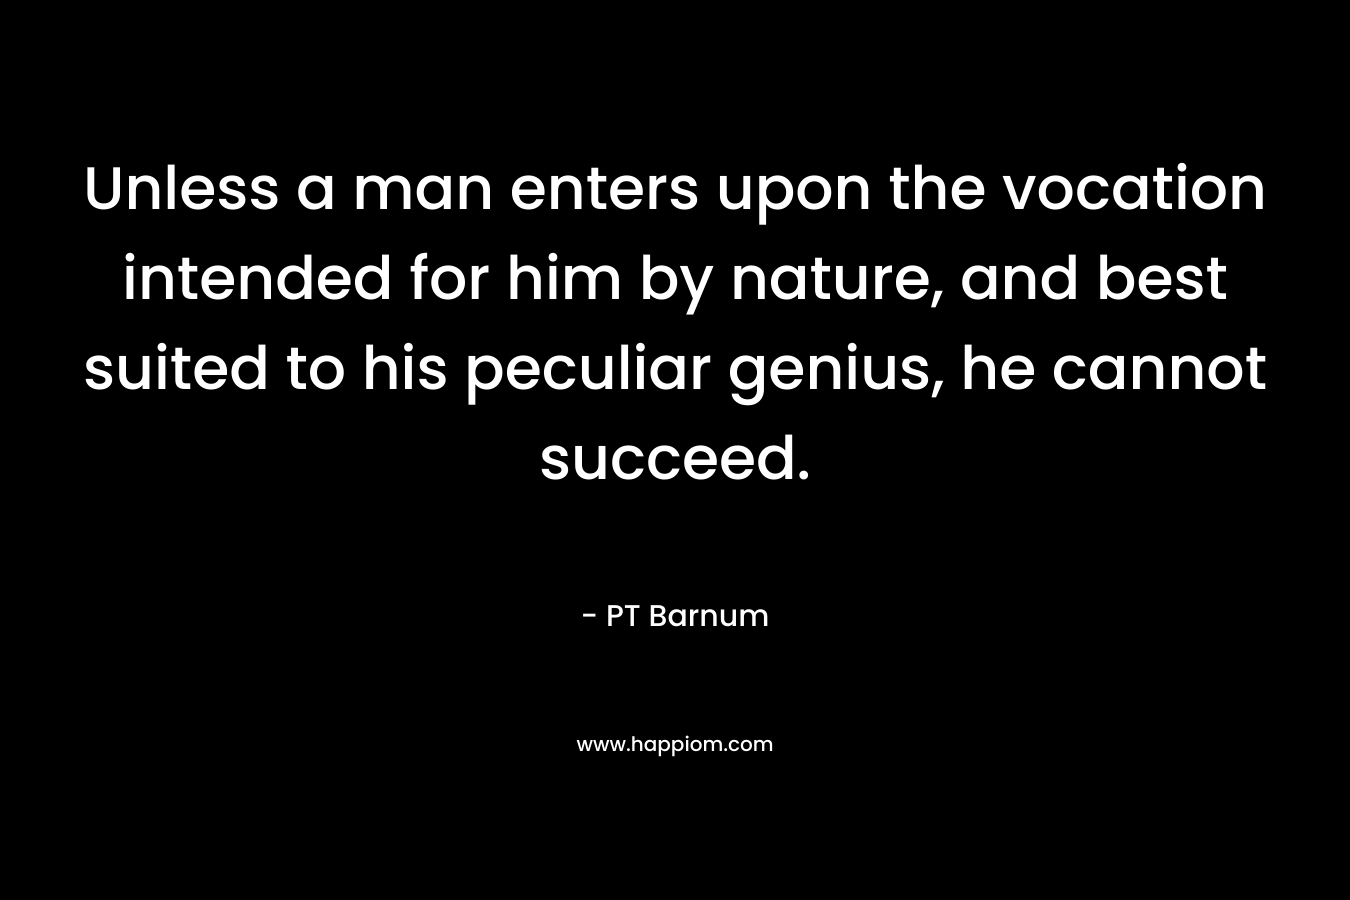 Unless a man enters upon the vocation intended for him by nature, and best suited to his peculiar genius, he cannot succeed. – PT Barnum